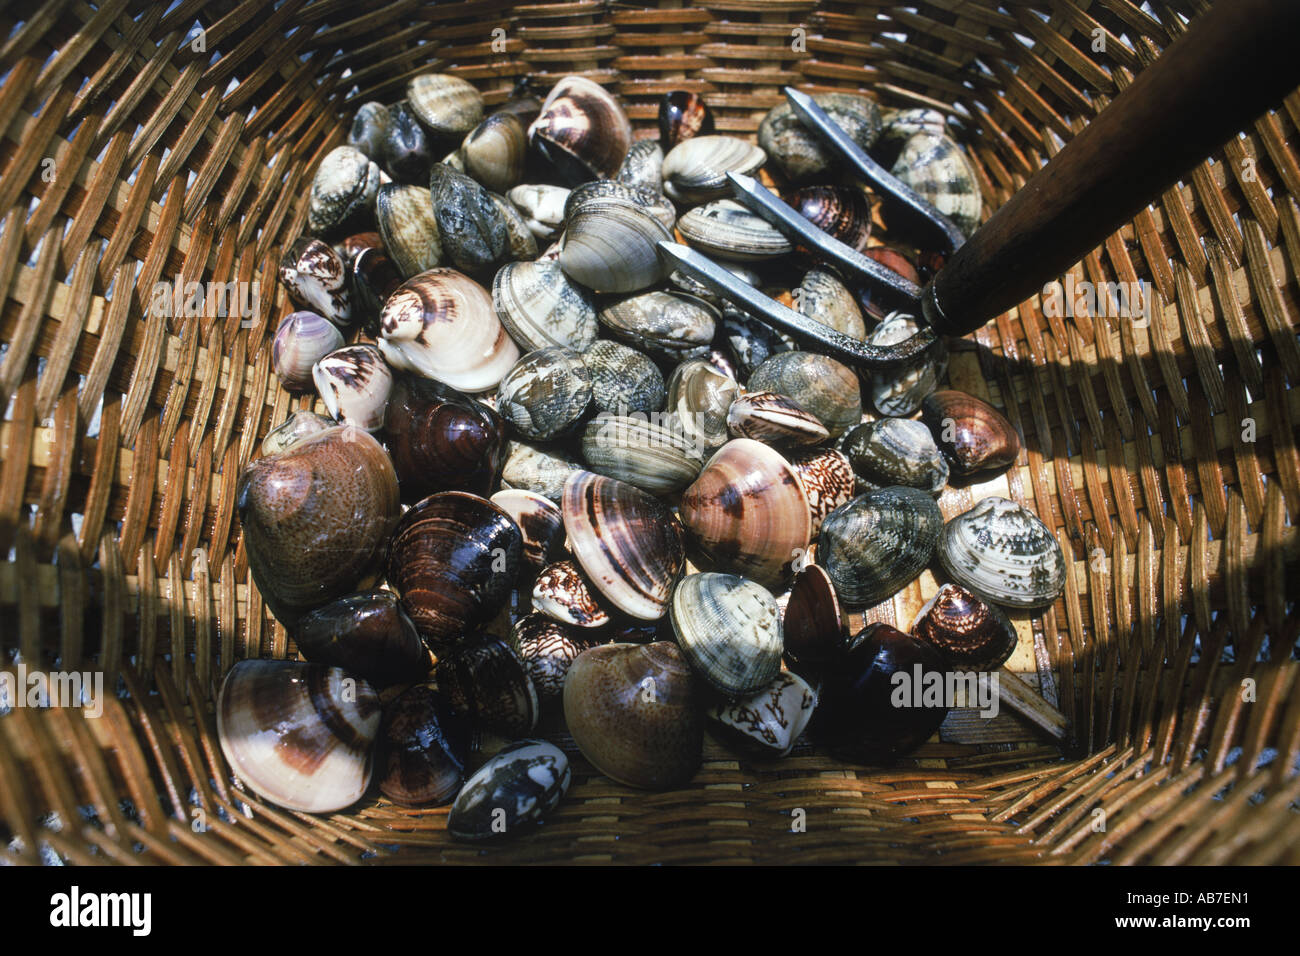 Basket of  short necked clams used in variety of Japanese cuisine Stock Photo